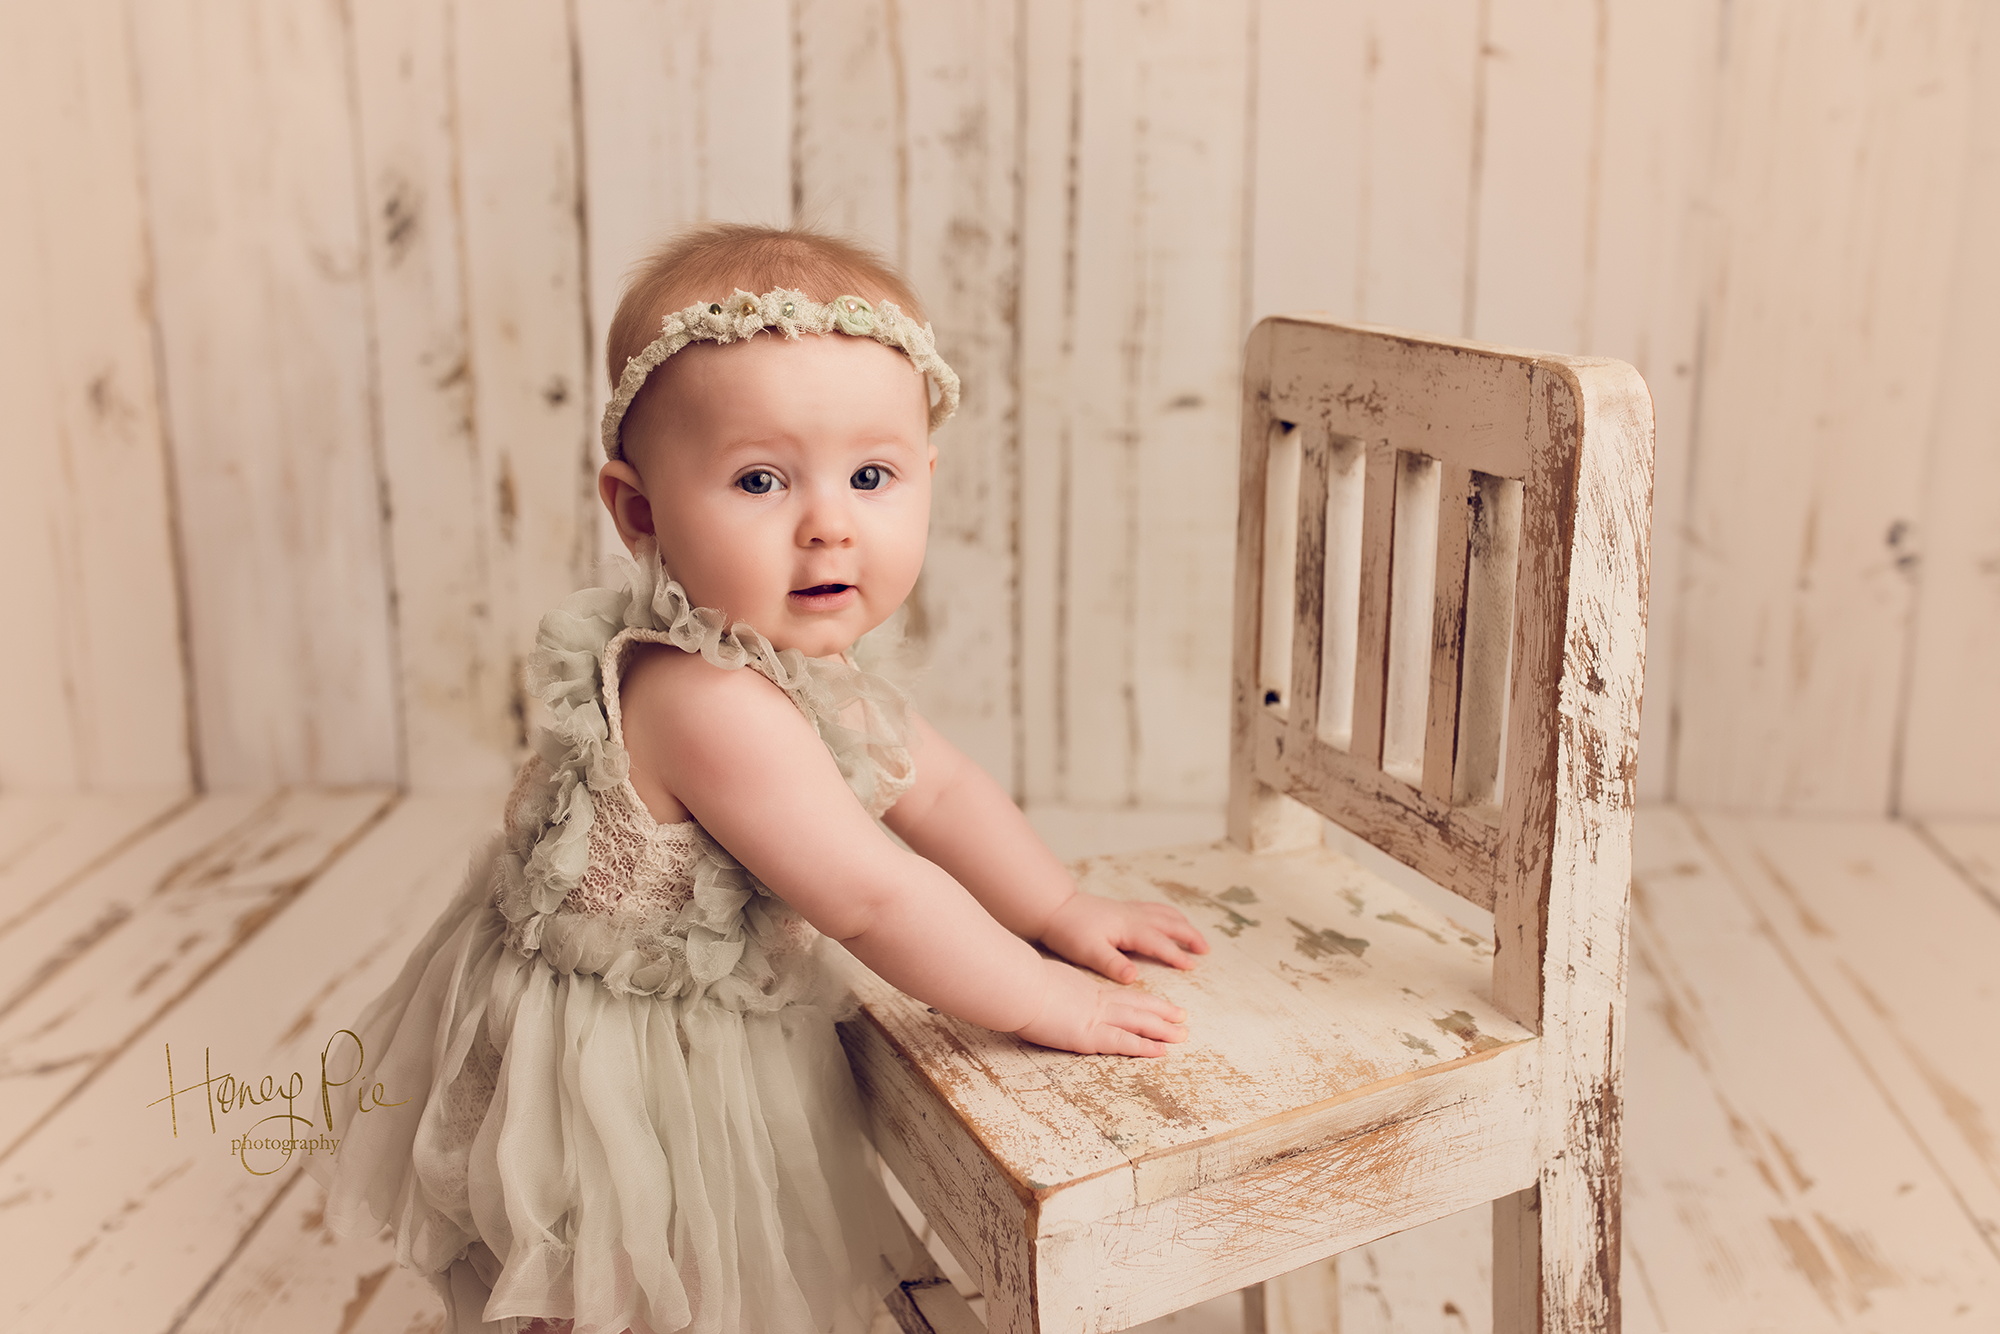 9 month old with wide eyes smiling at photographer during her baby photoshoot in sussex